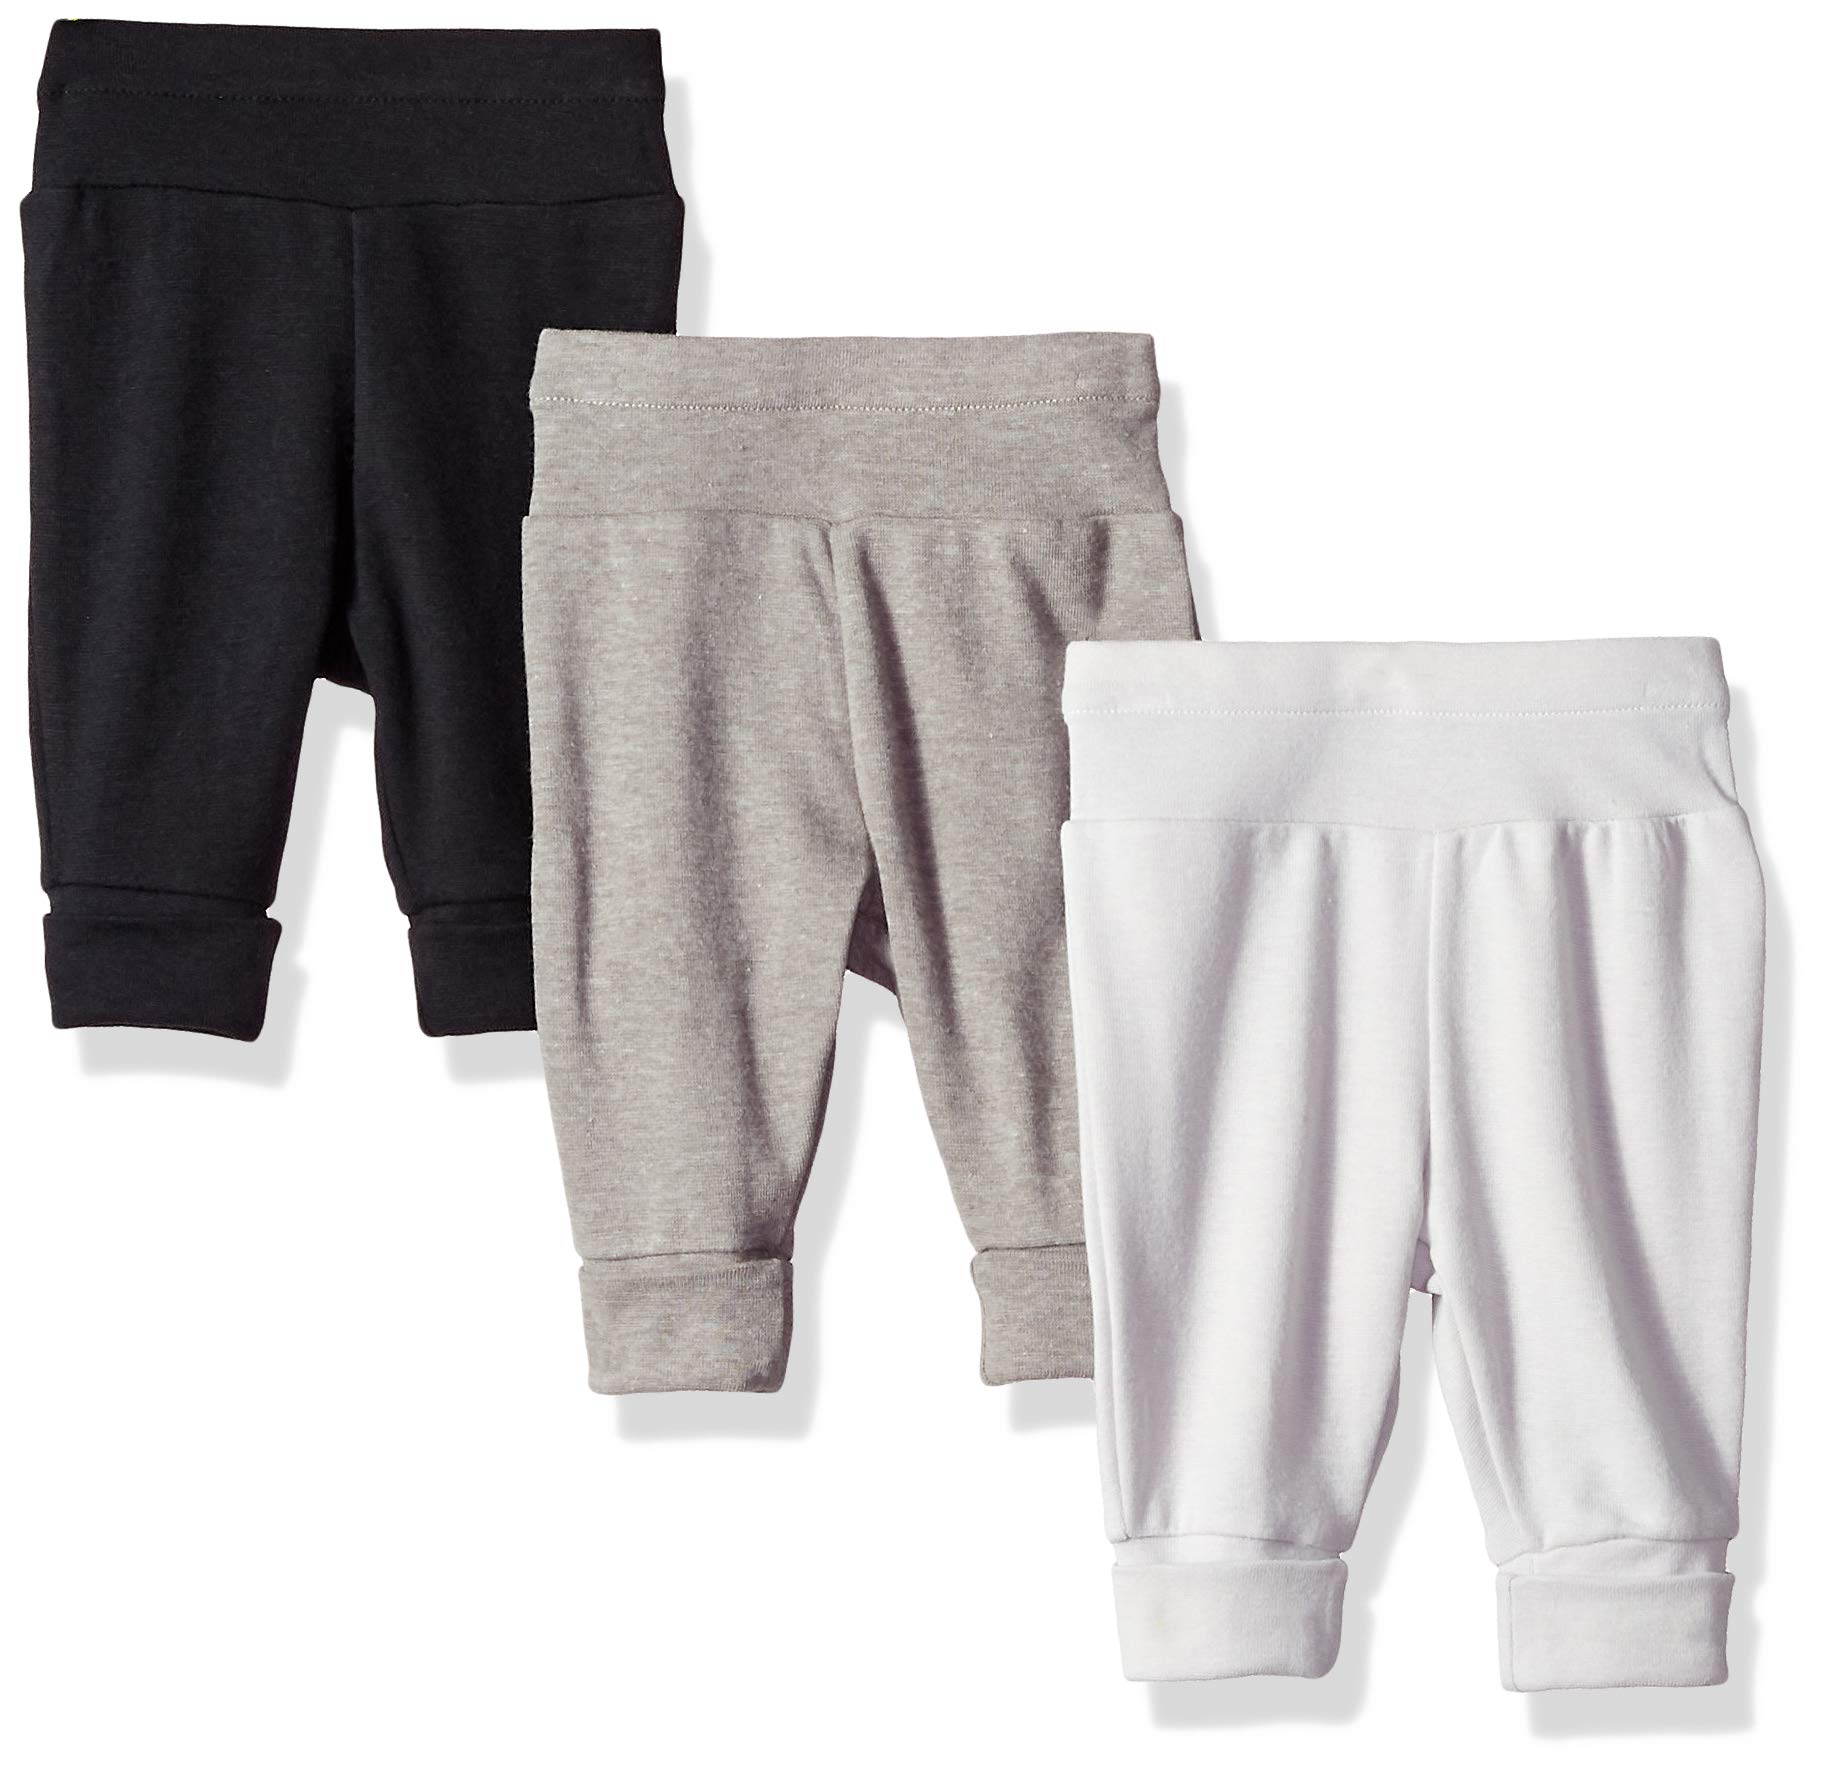 Hanes Baby Pants, Flexy Soft Knit Pull-on Sweatpants, Stretch Joggers for Babies & Toddlers, 3-Pack